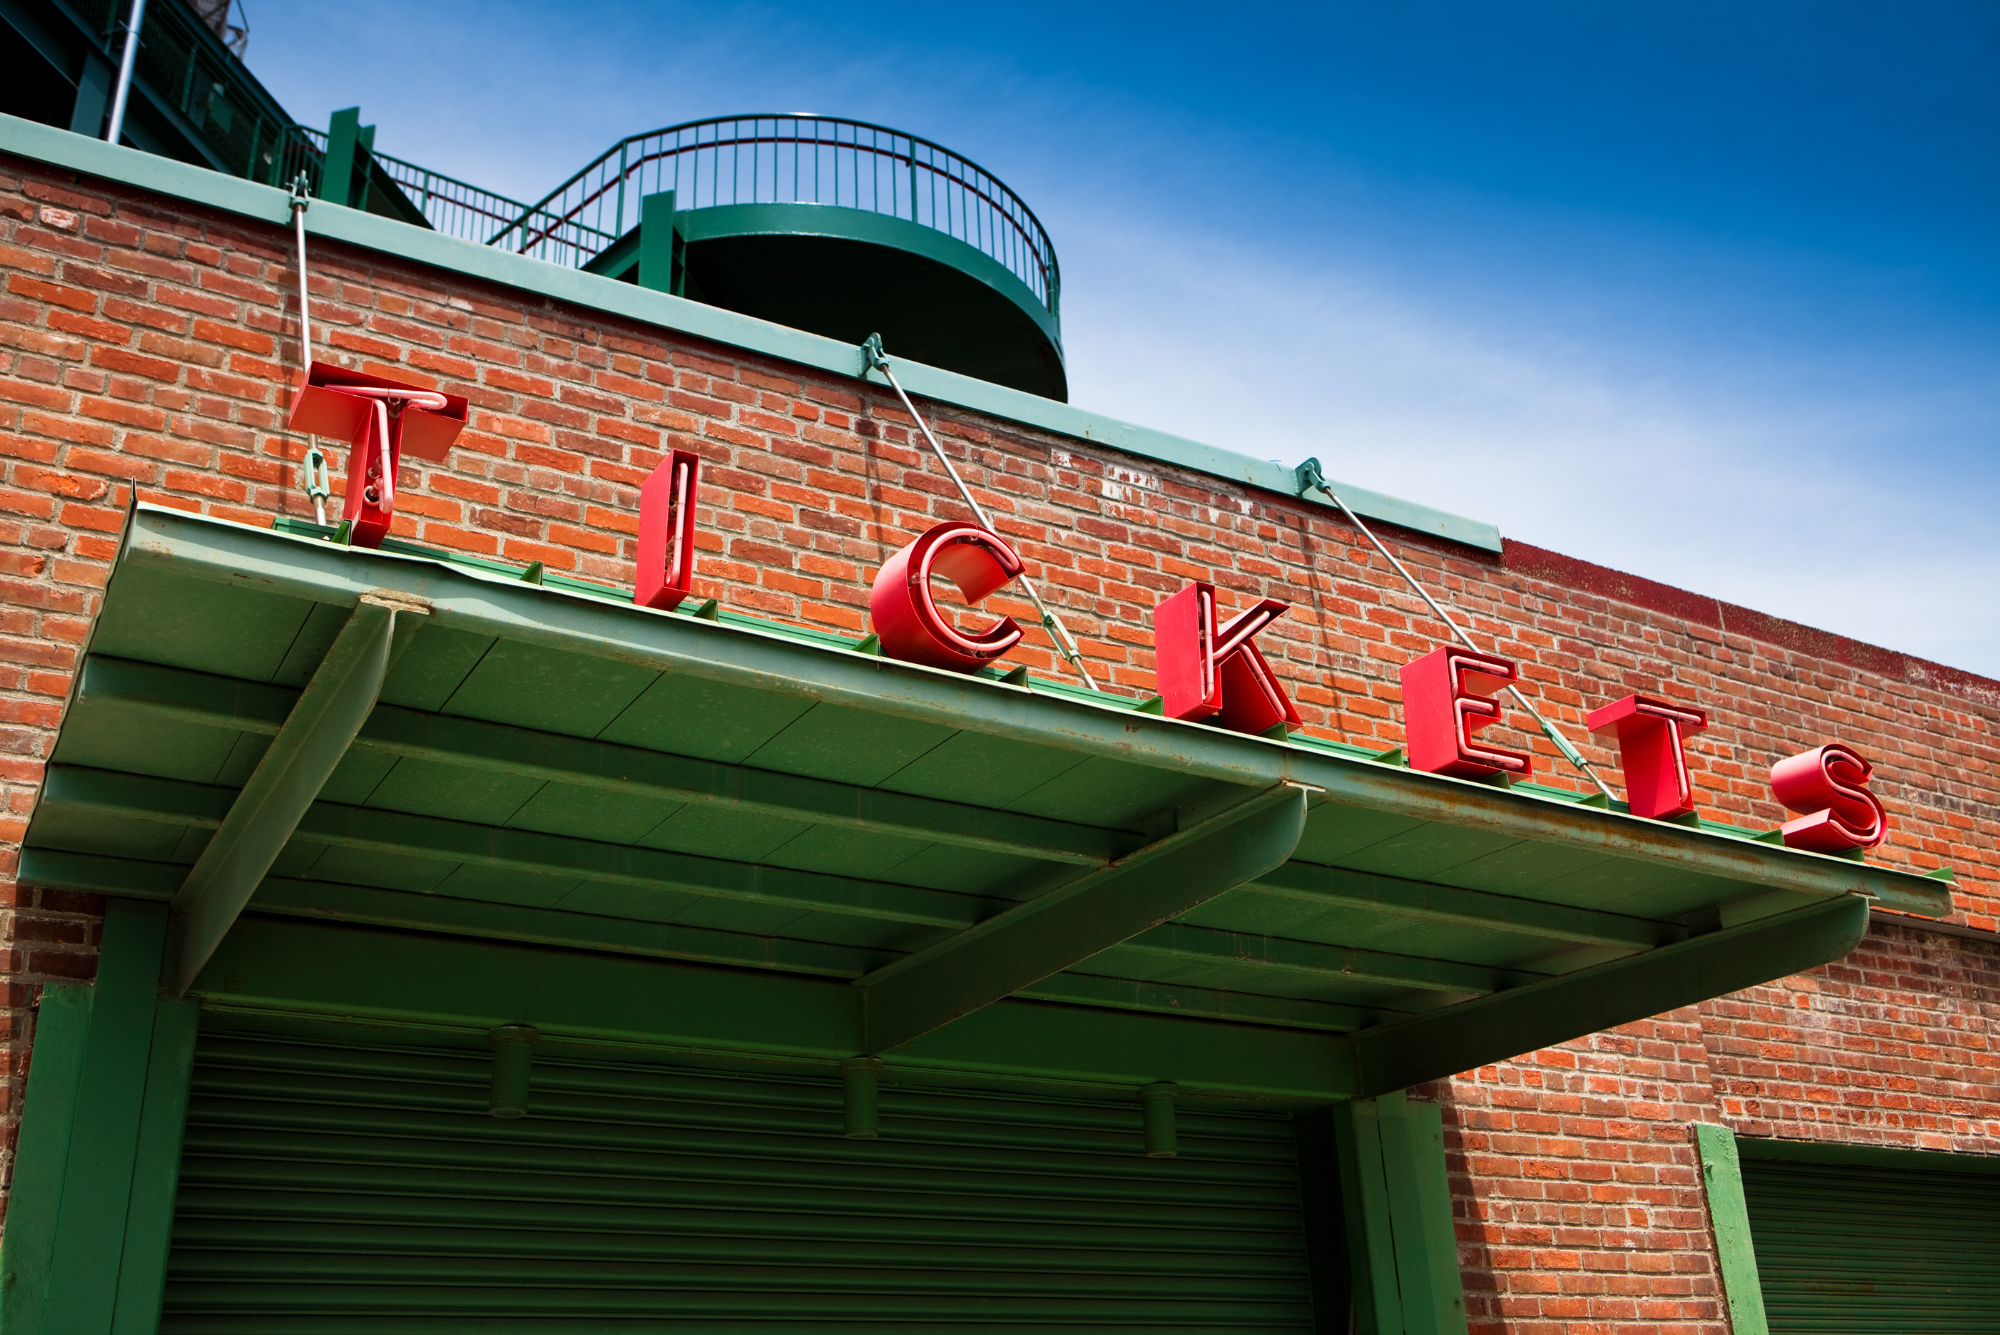 A green ballpark awning reading “Tickets” in red represents an article on the best event ticketing platforms.